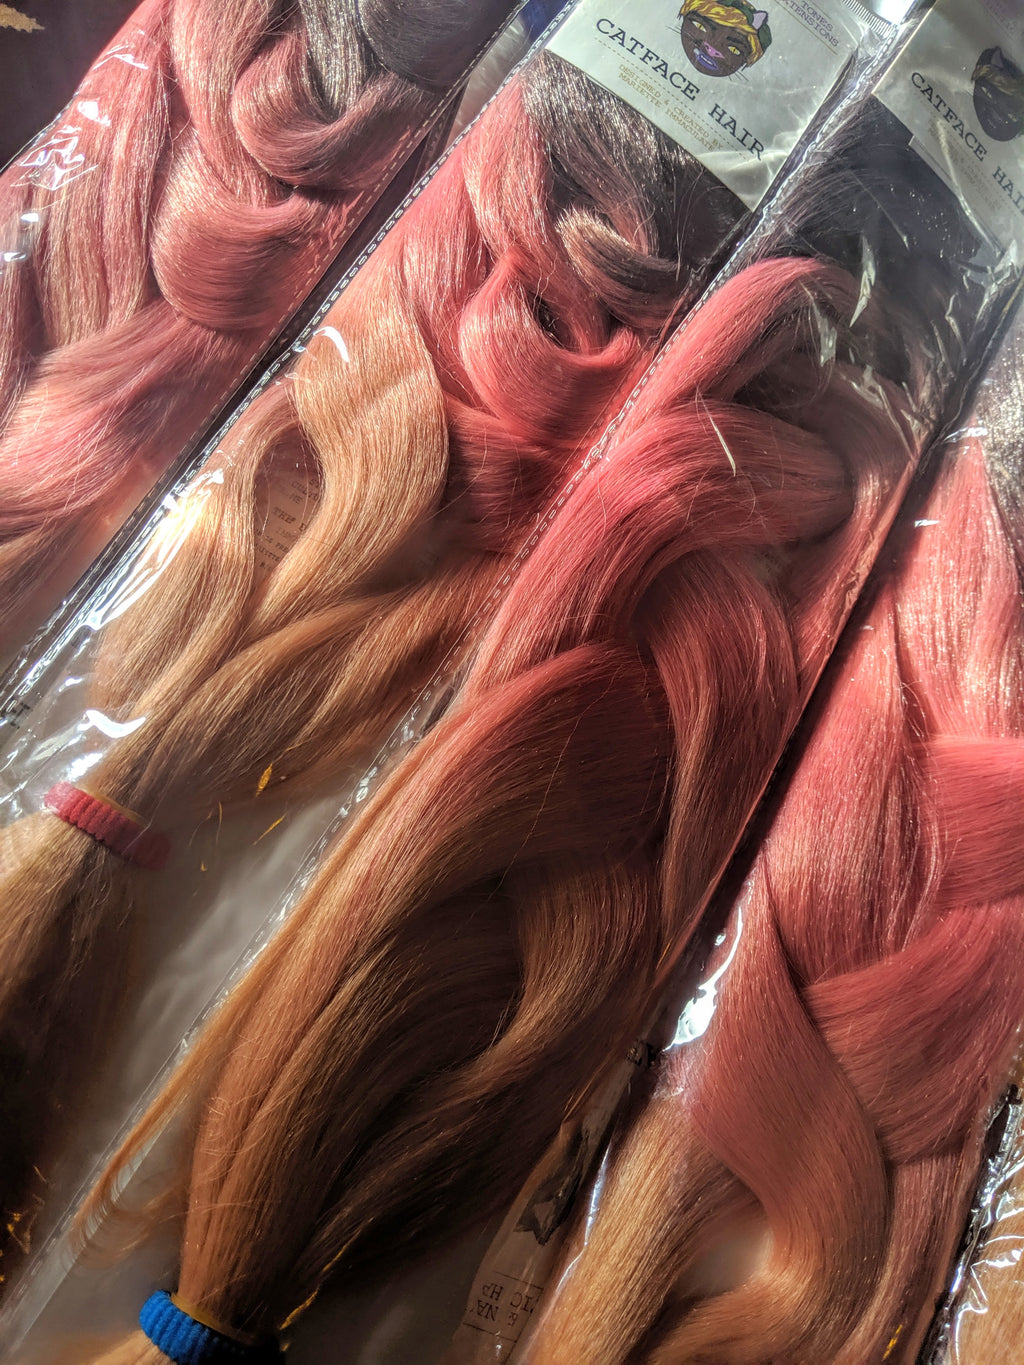 CATFACE HAIR BLACK PINK CANDY OMBRE 30 INCHES JUMBO BRAIDING HAIR.